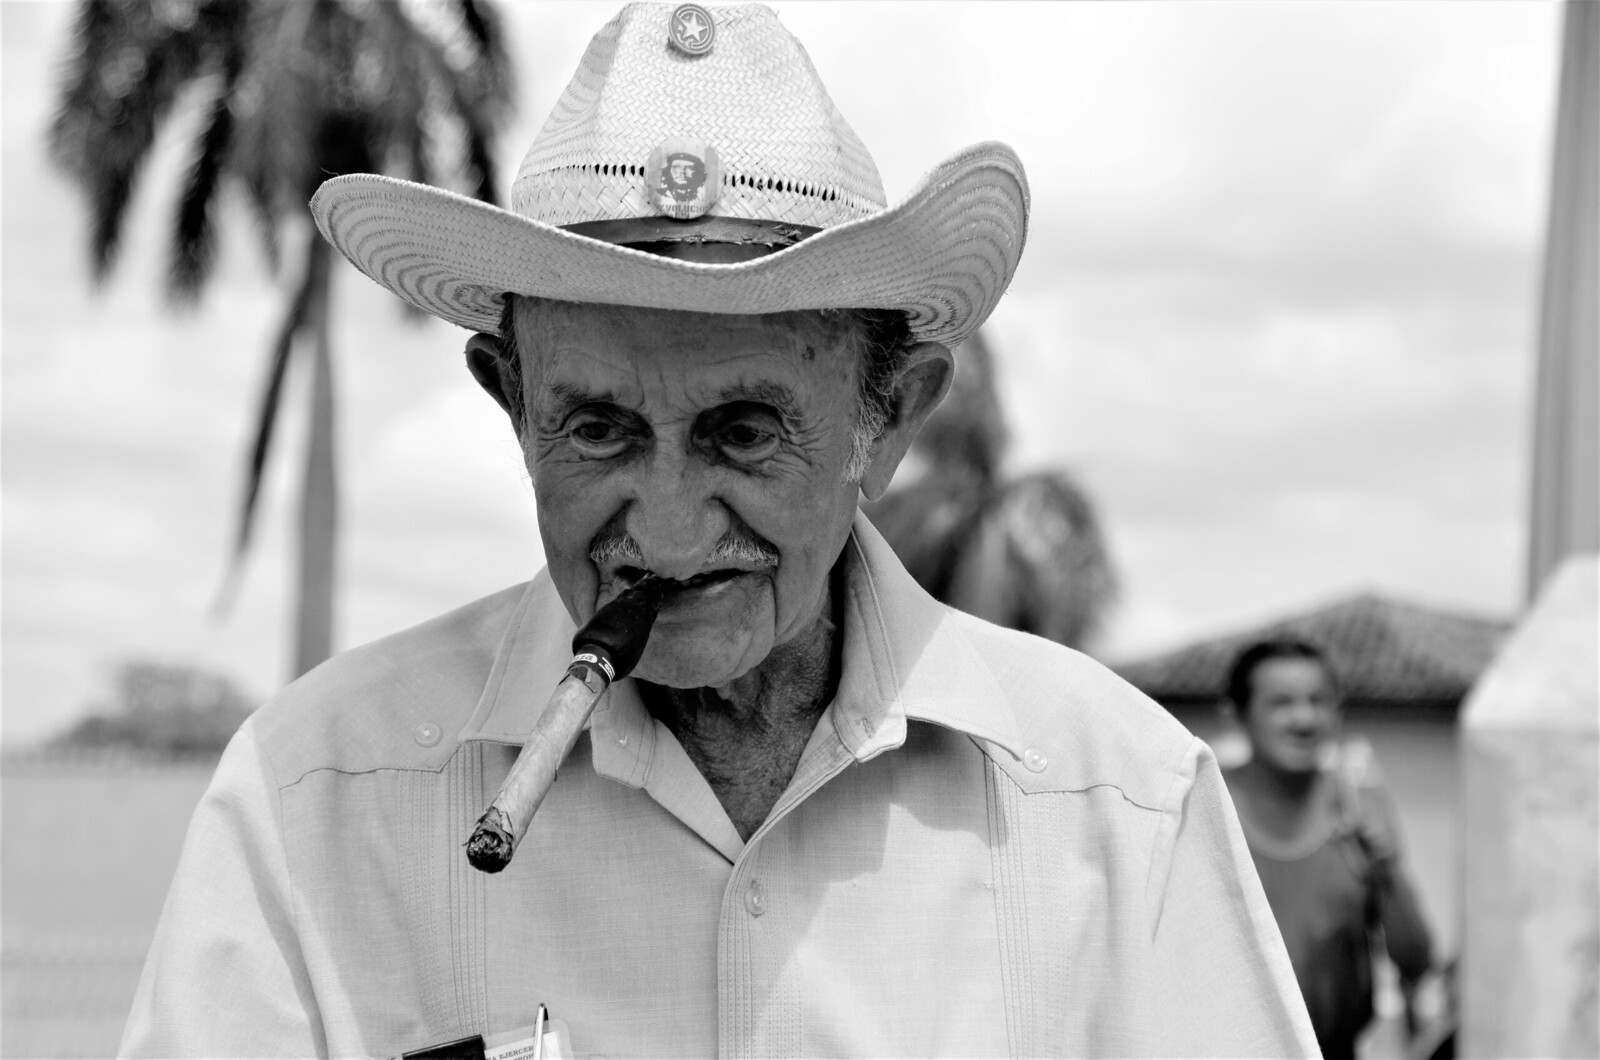 Humans of the world 14/Cuba